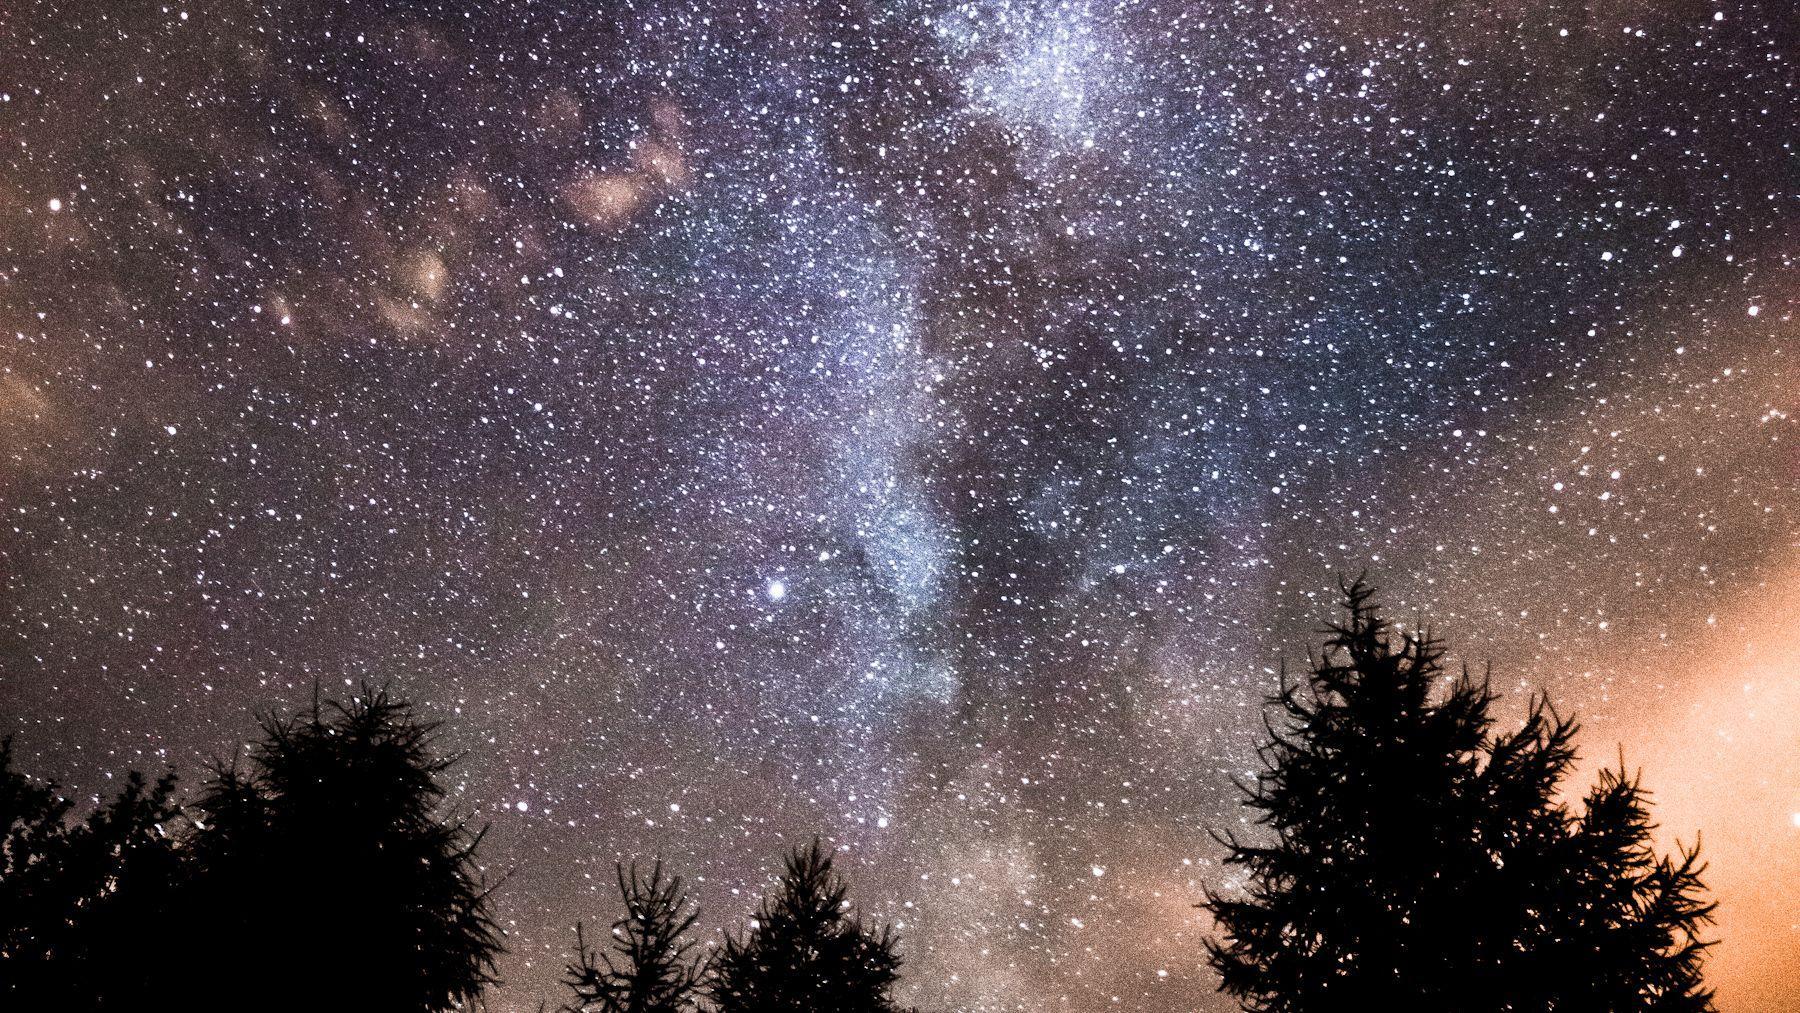 Photographing the Sky at Night, The Basics